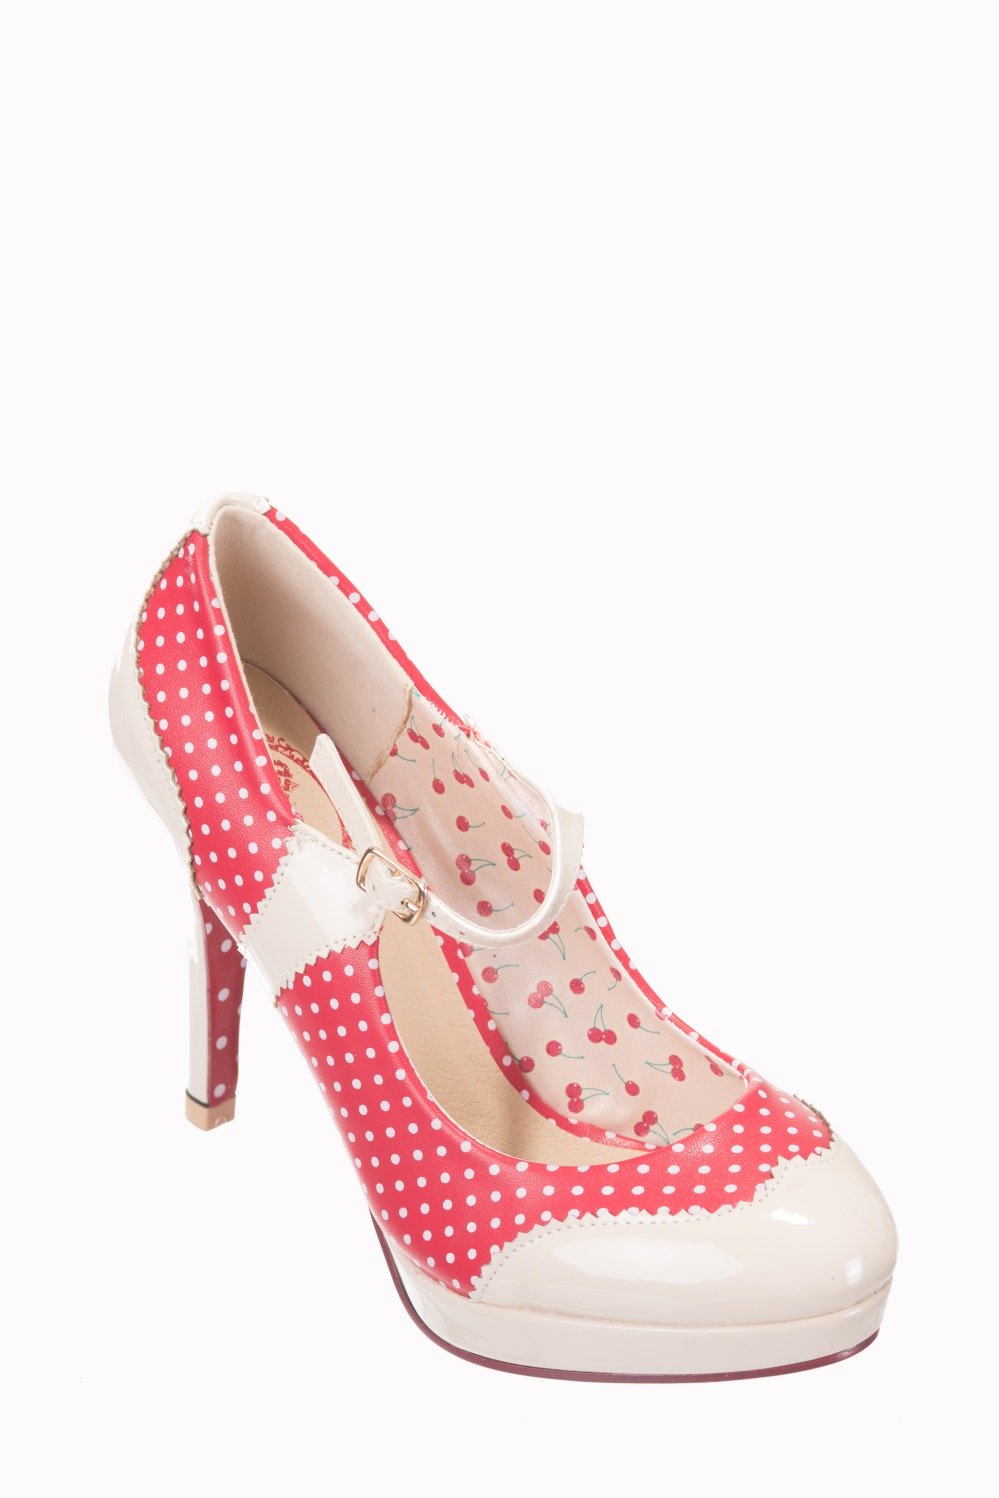 Dancing Days Mary Jane Red Nude 50s Polka Dot Shoes